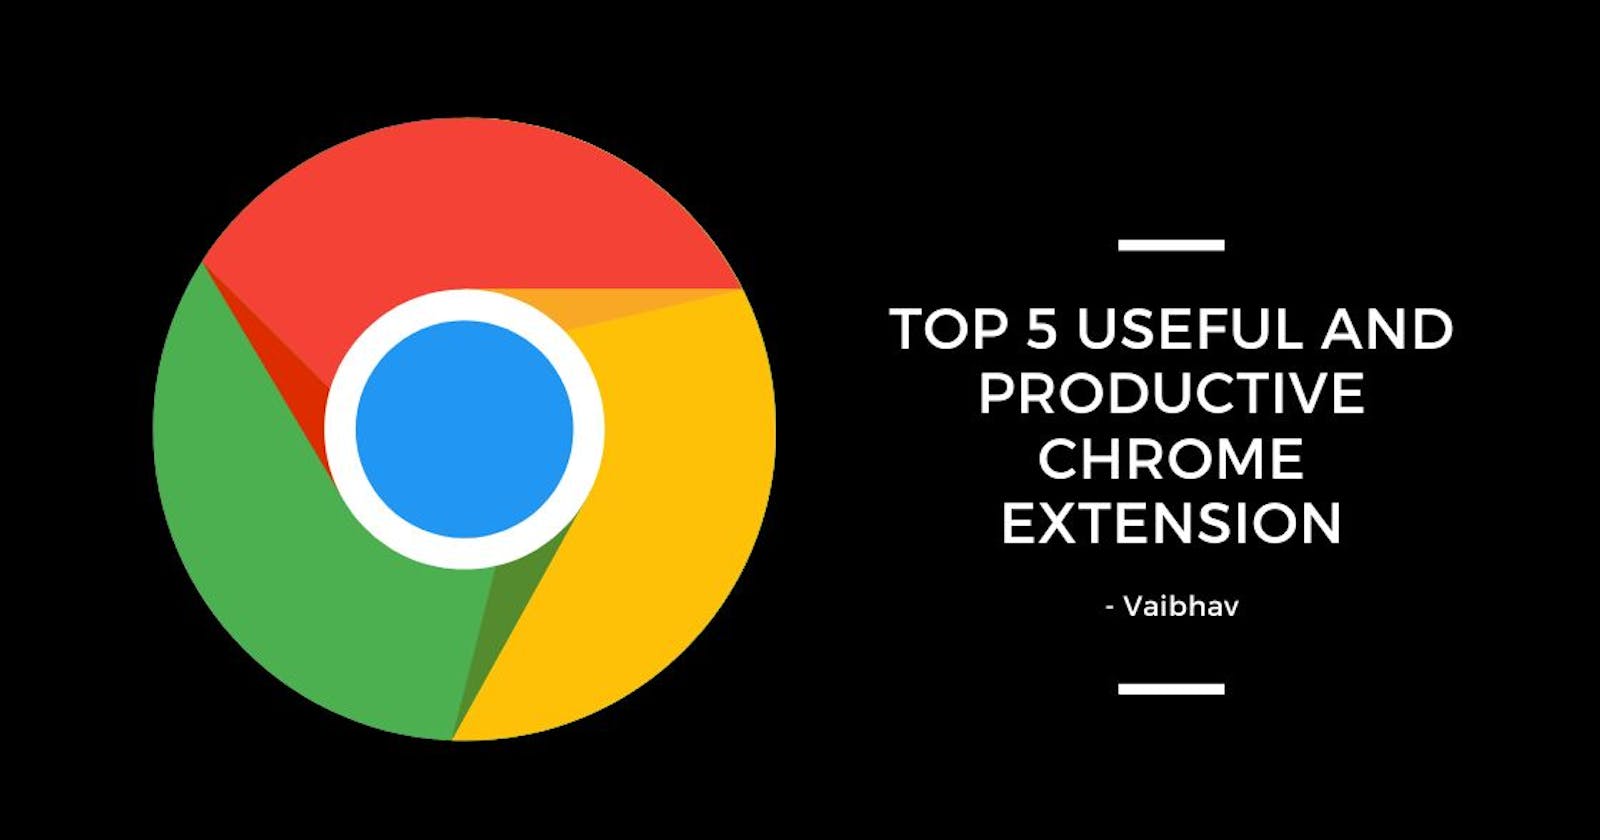 Top 5 Productive and useful chrome extensions for developers